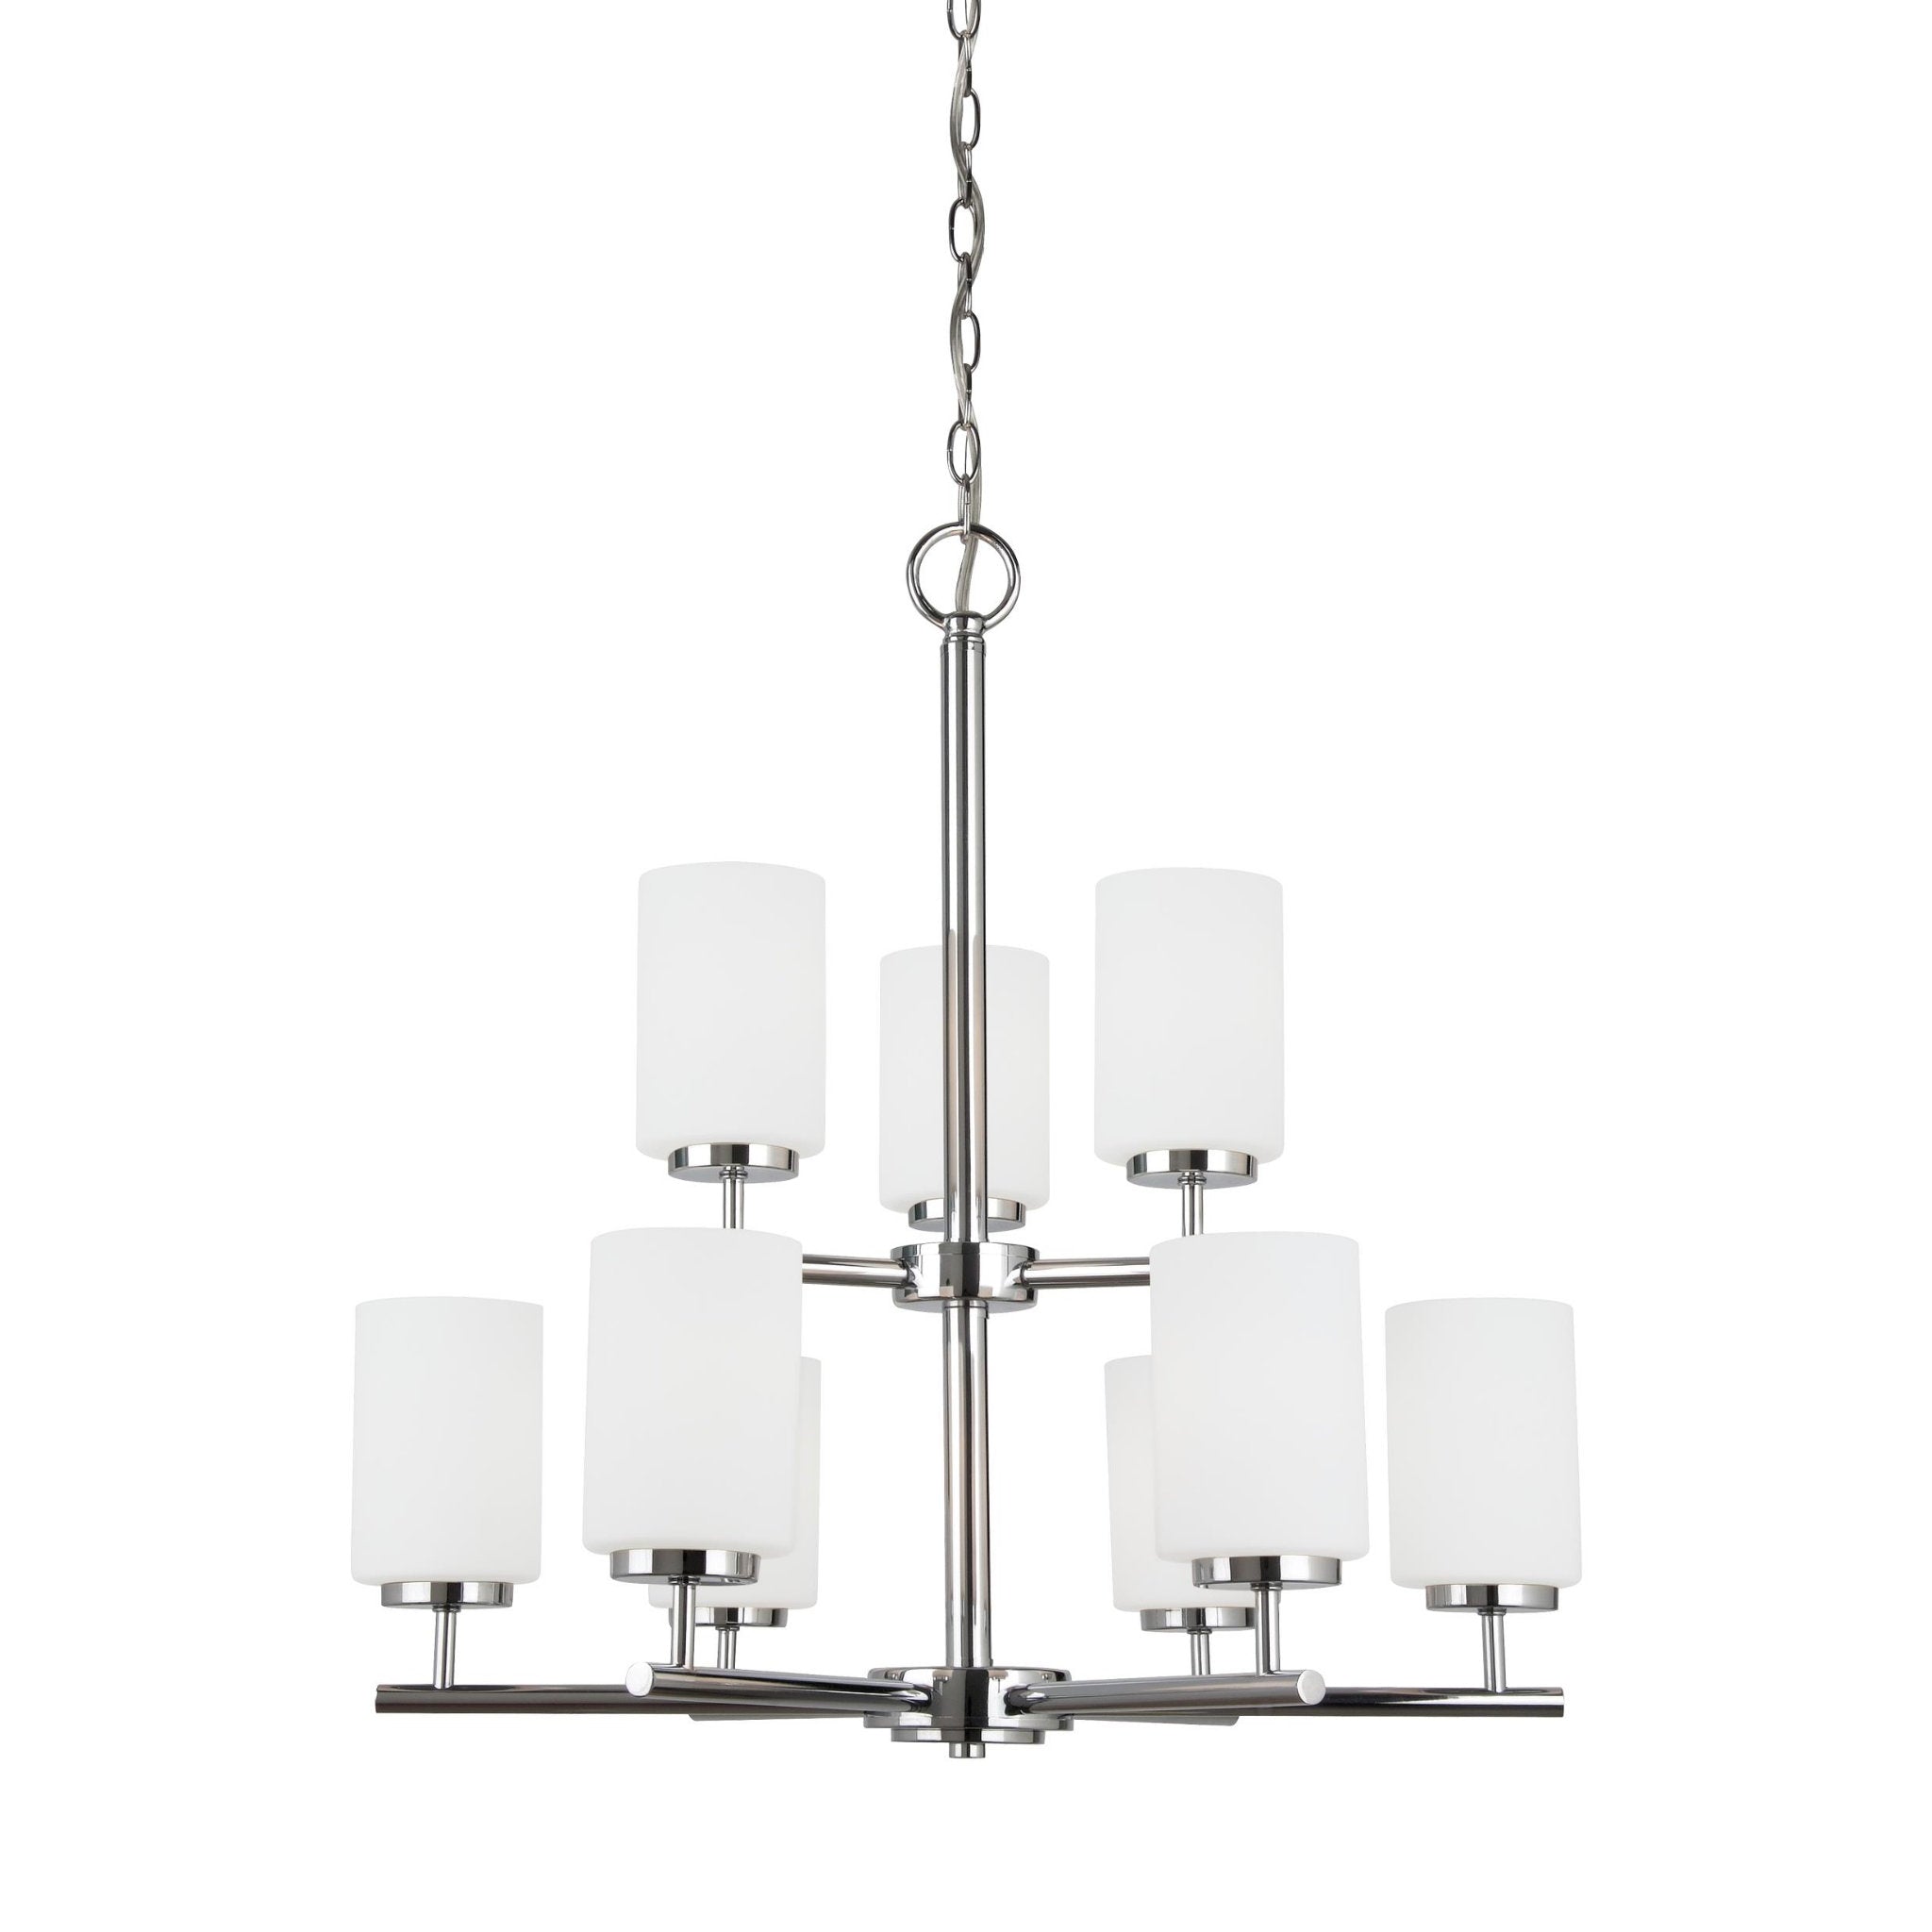 Oslo Nine Light Chandelier Contemporary 26.75" Height Steel Round Cased Opal Etched Shade in Chrome